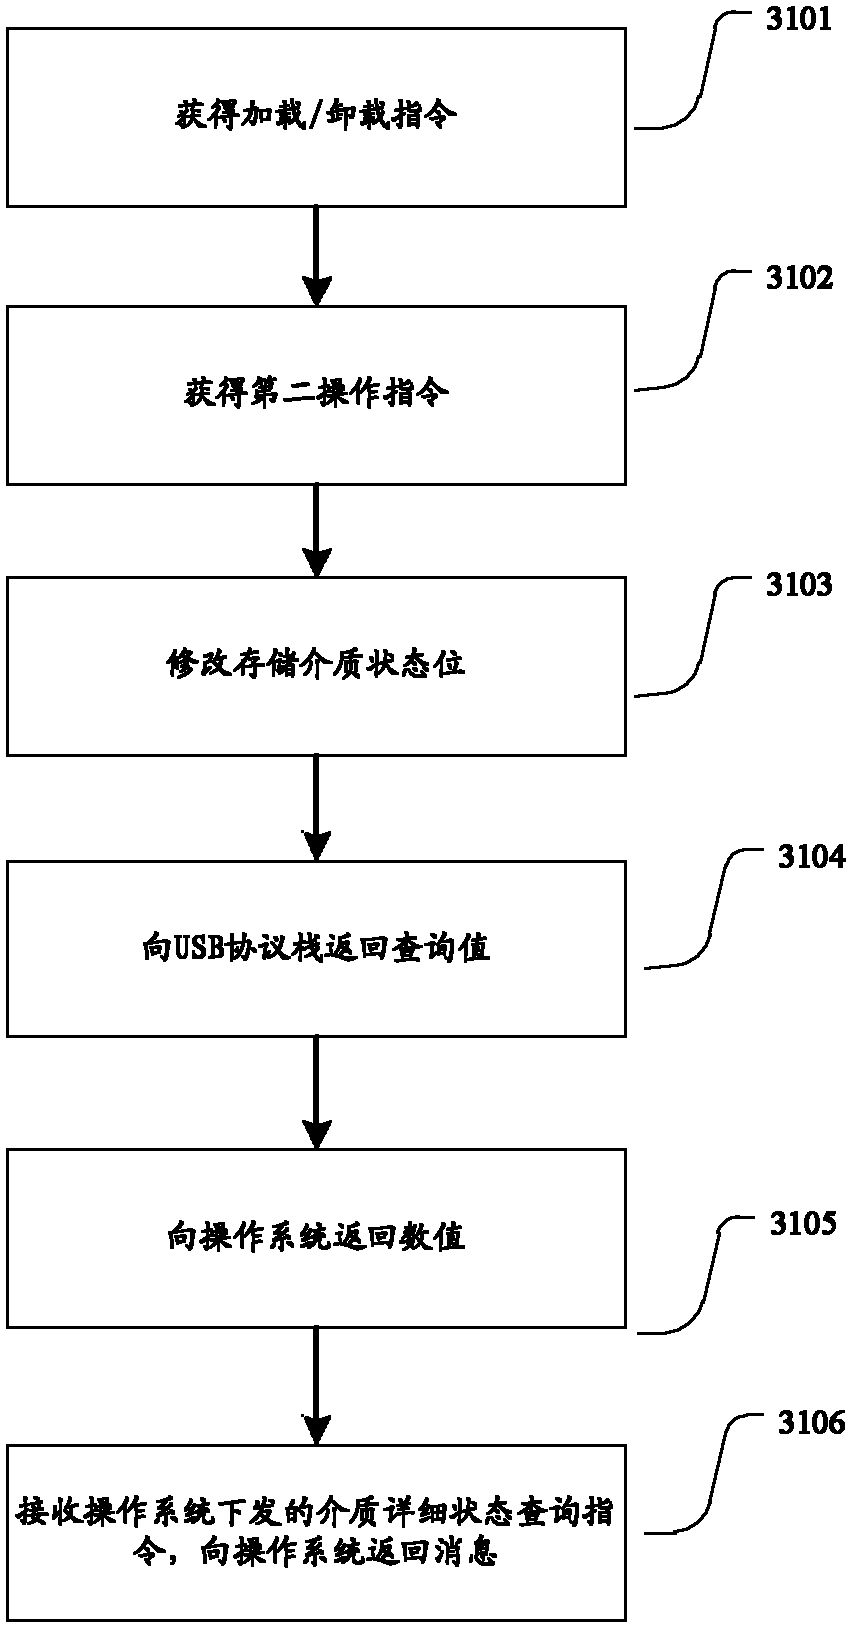 Method for processing operating instructions from computer and interface device